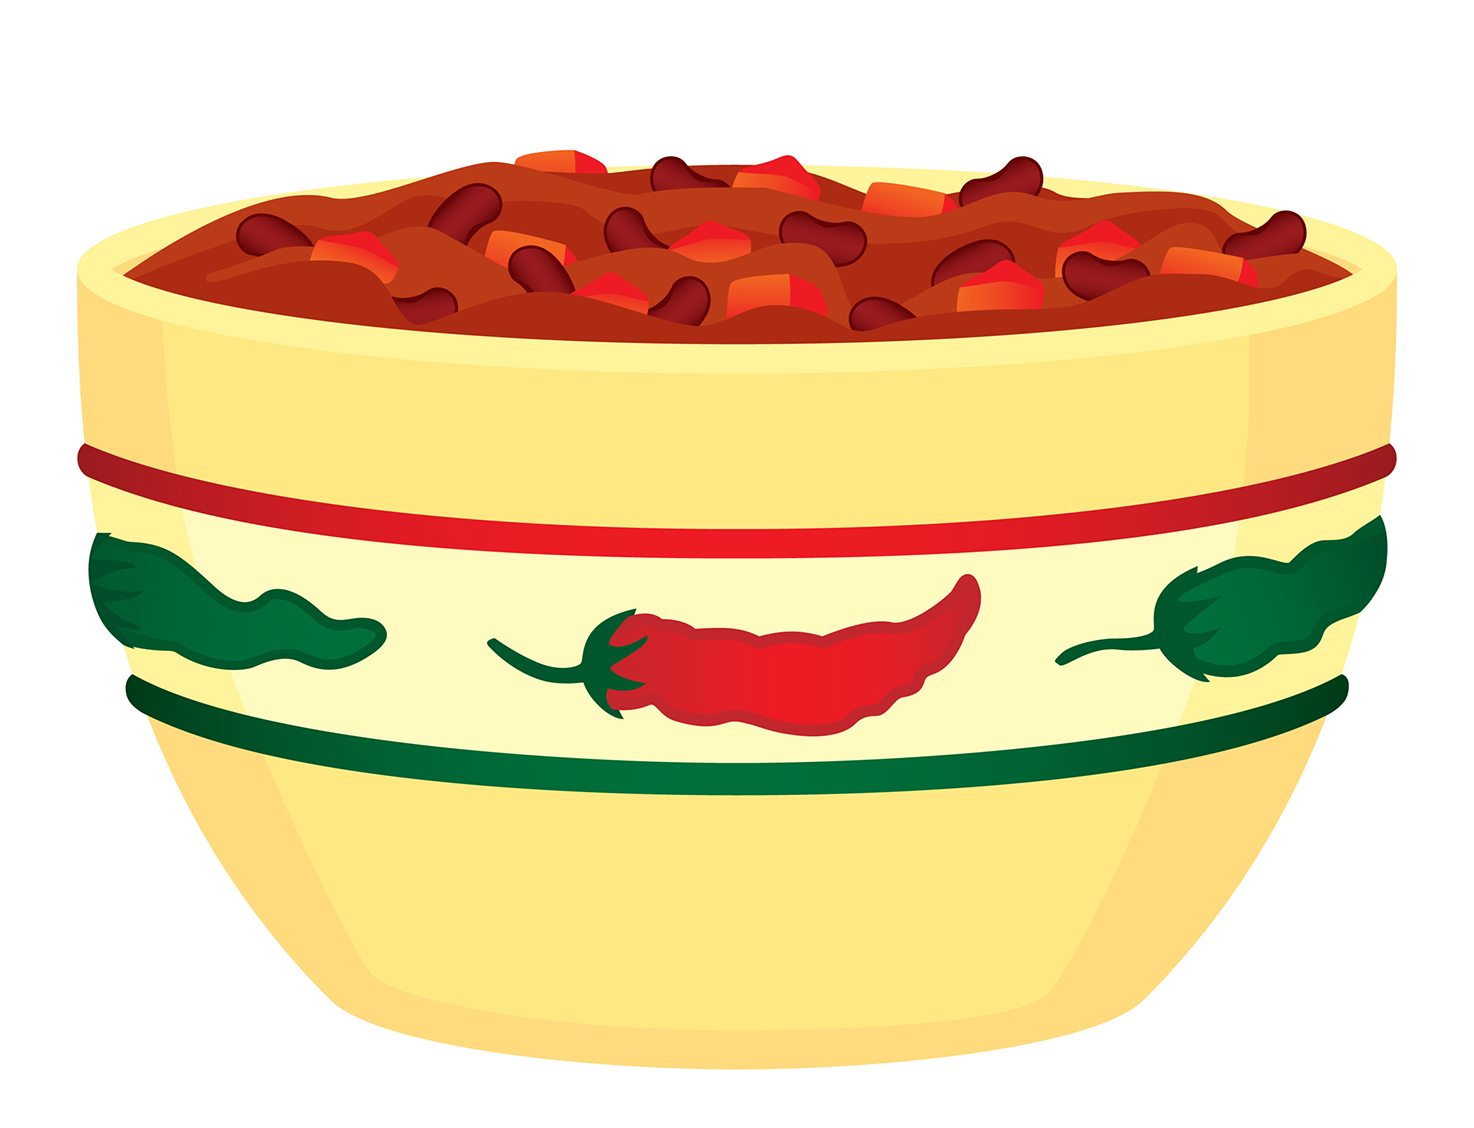 Ridgefield&#039;s First Saturday tailgate party will include the Community Chili Challenge. Or add chili as a course to your progressive dinner party.